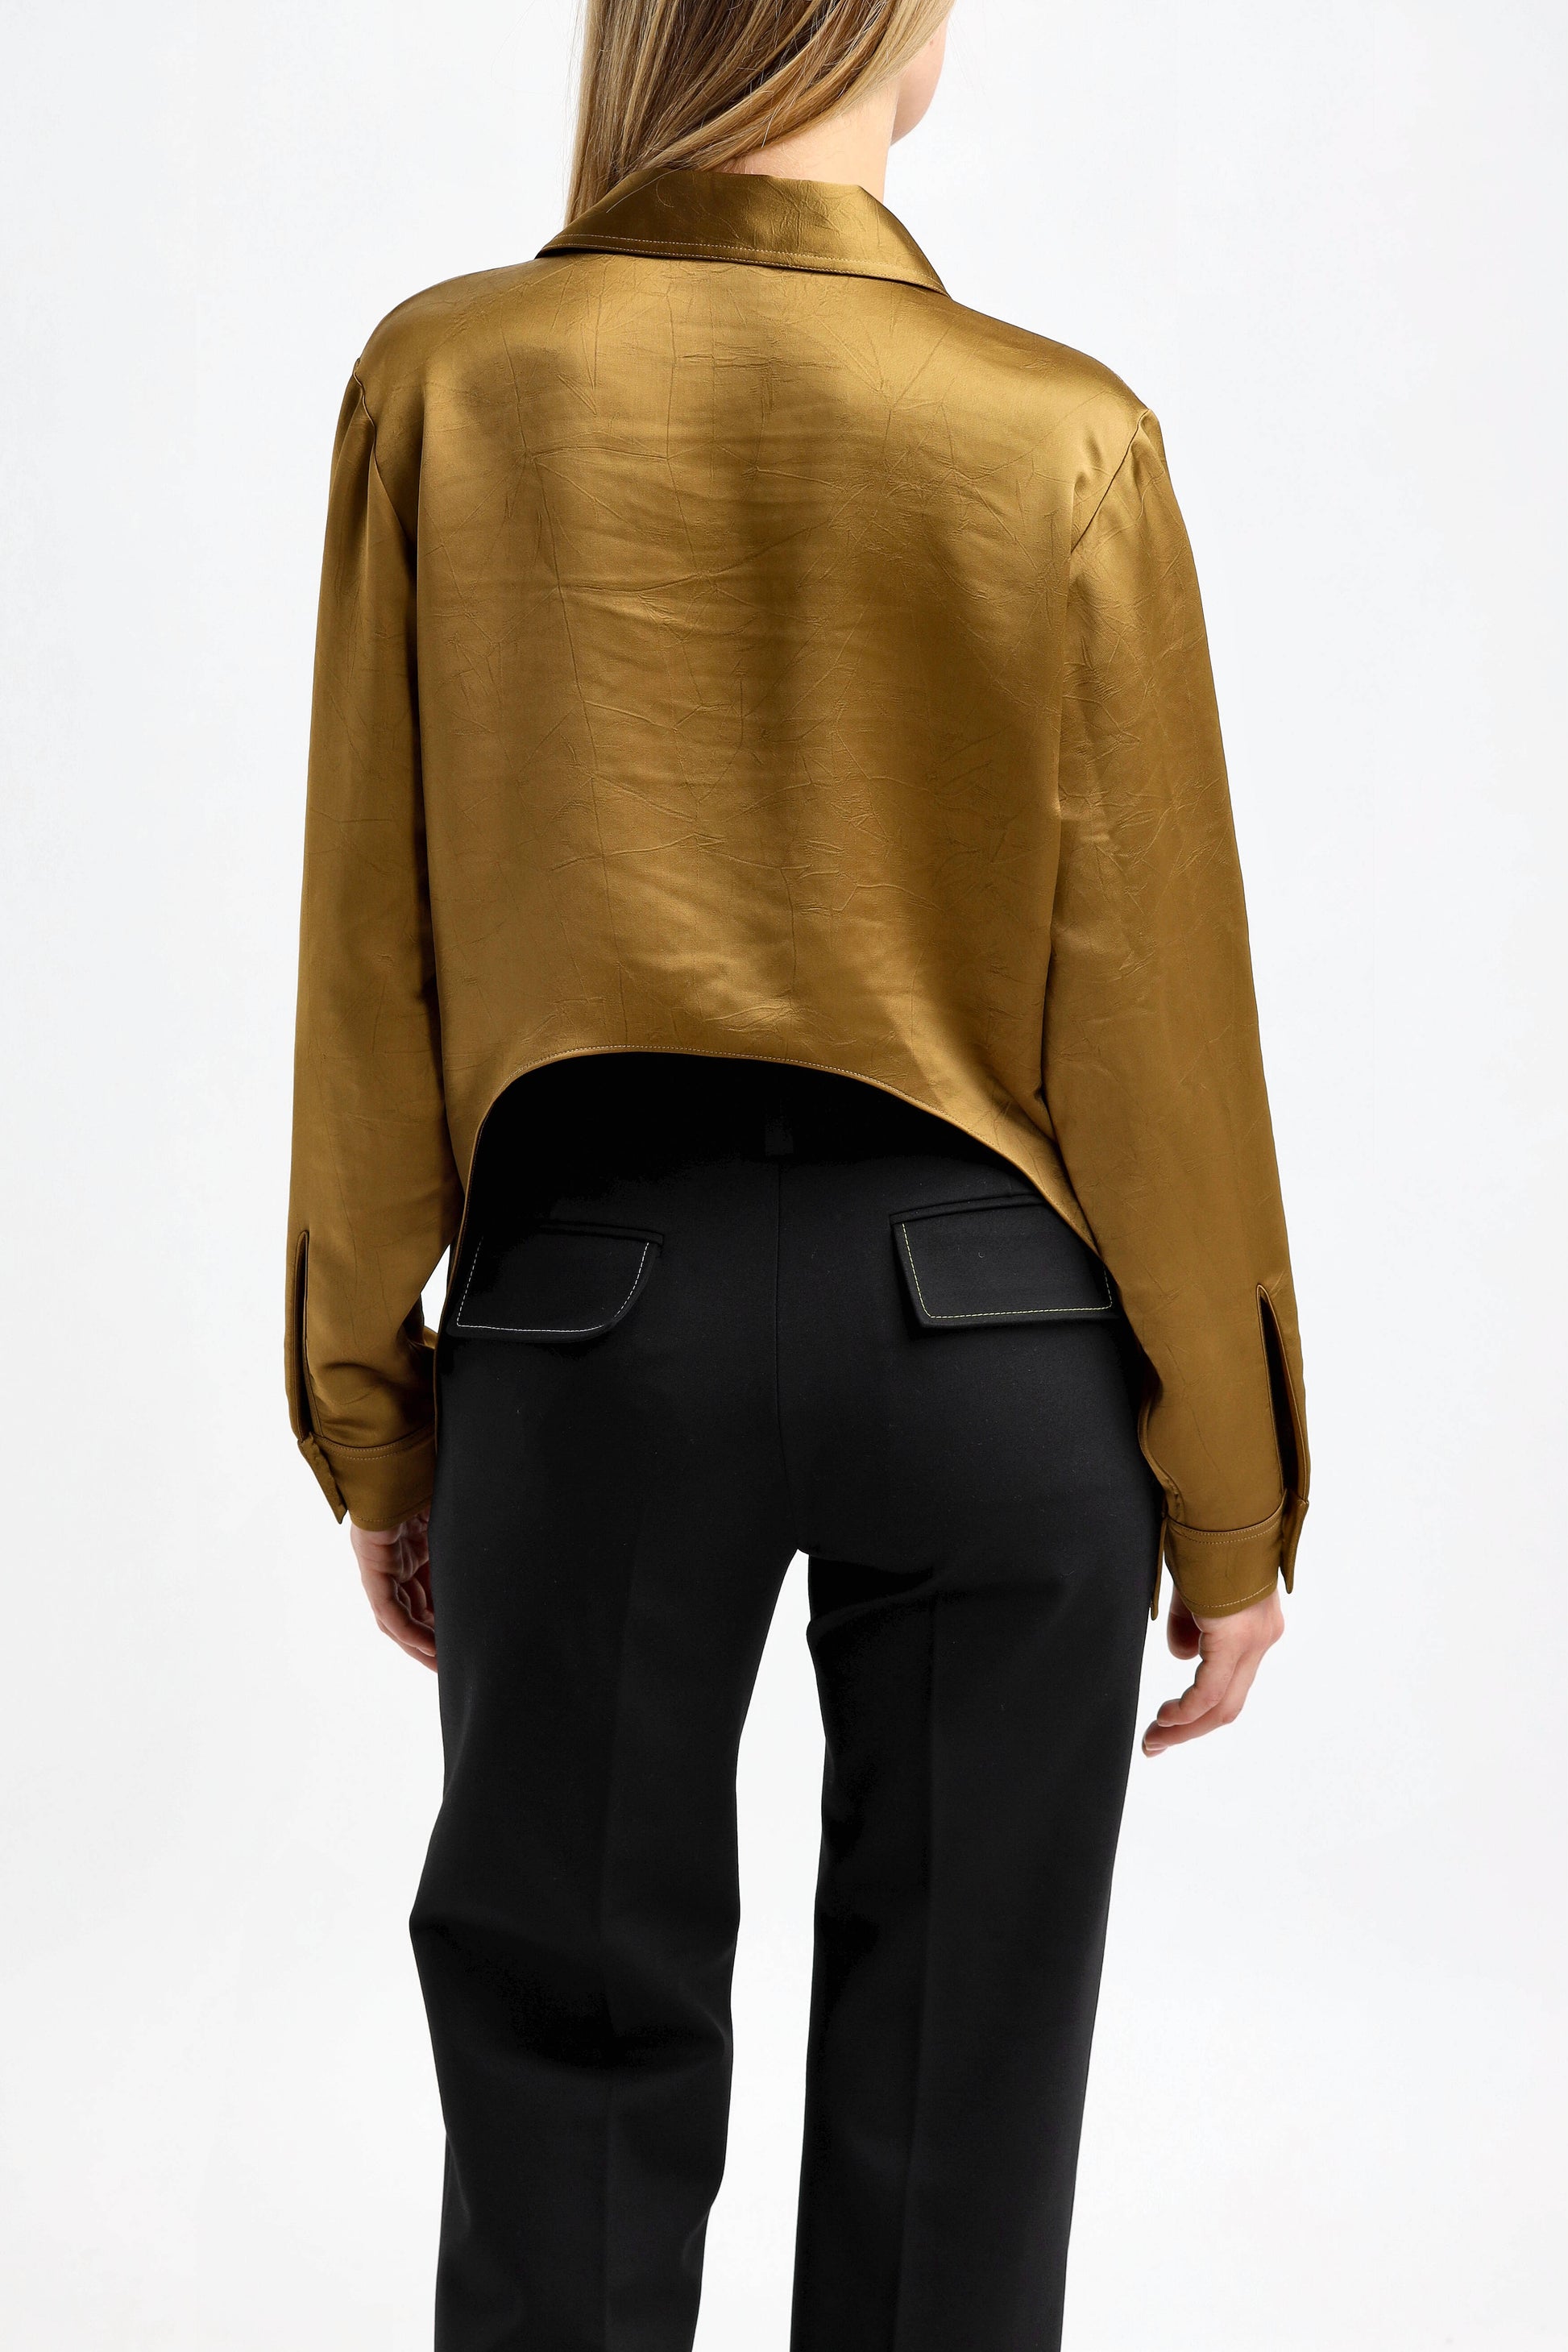 Bluse Patch Pocket in Tawny BrownVictoria Beckham - Anita Hass